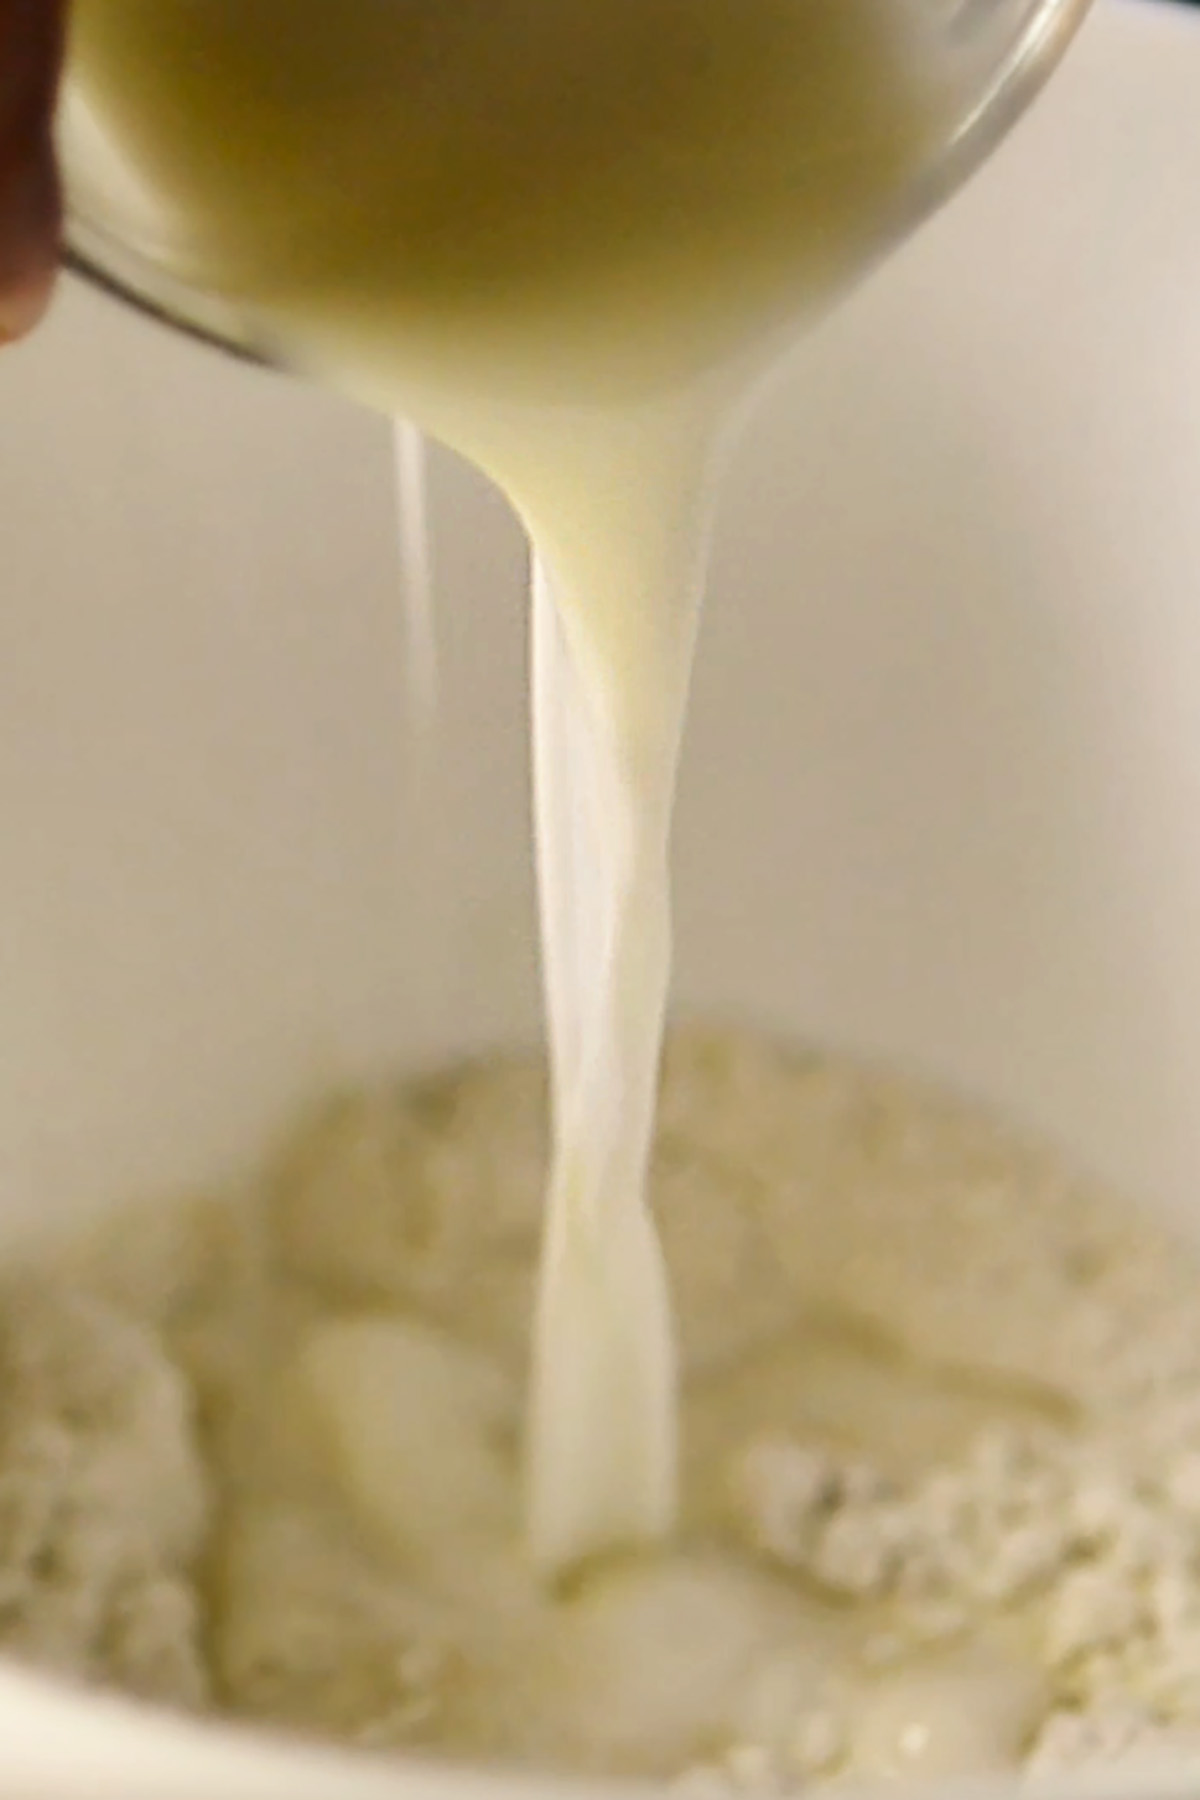 Milk being poured into a mixing bowl of flour.